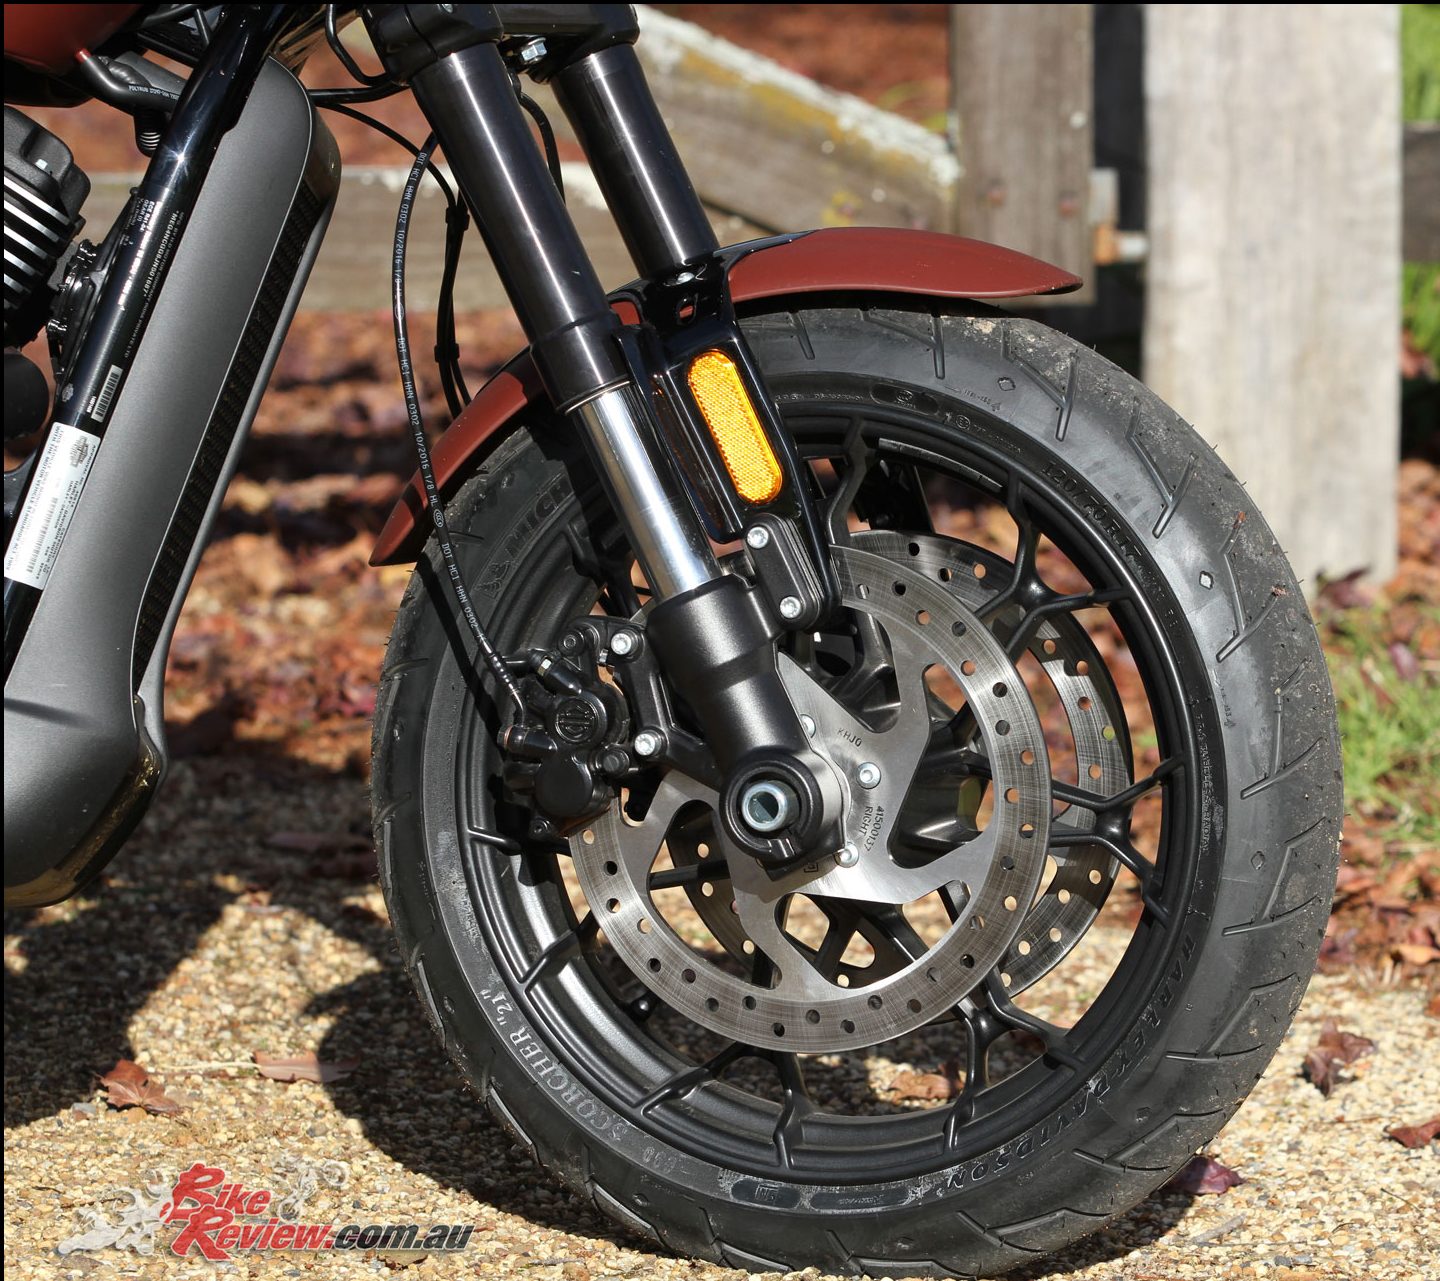 Forks and suspension are sporty offerings on the Street Rod with 43mm USD forks and dual front rotors.